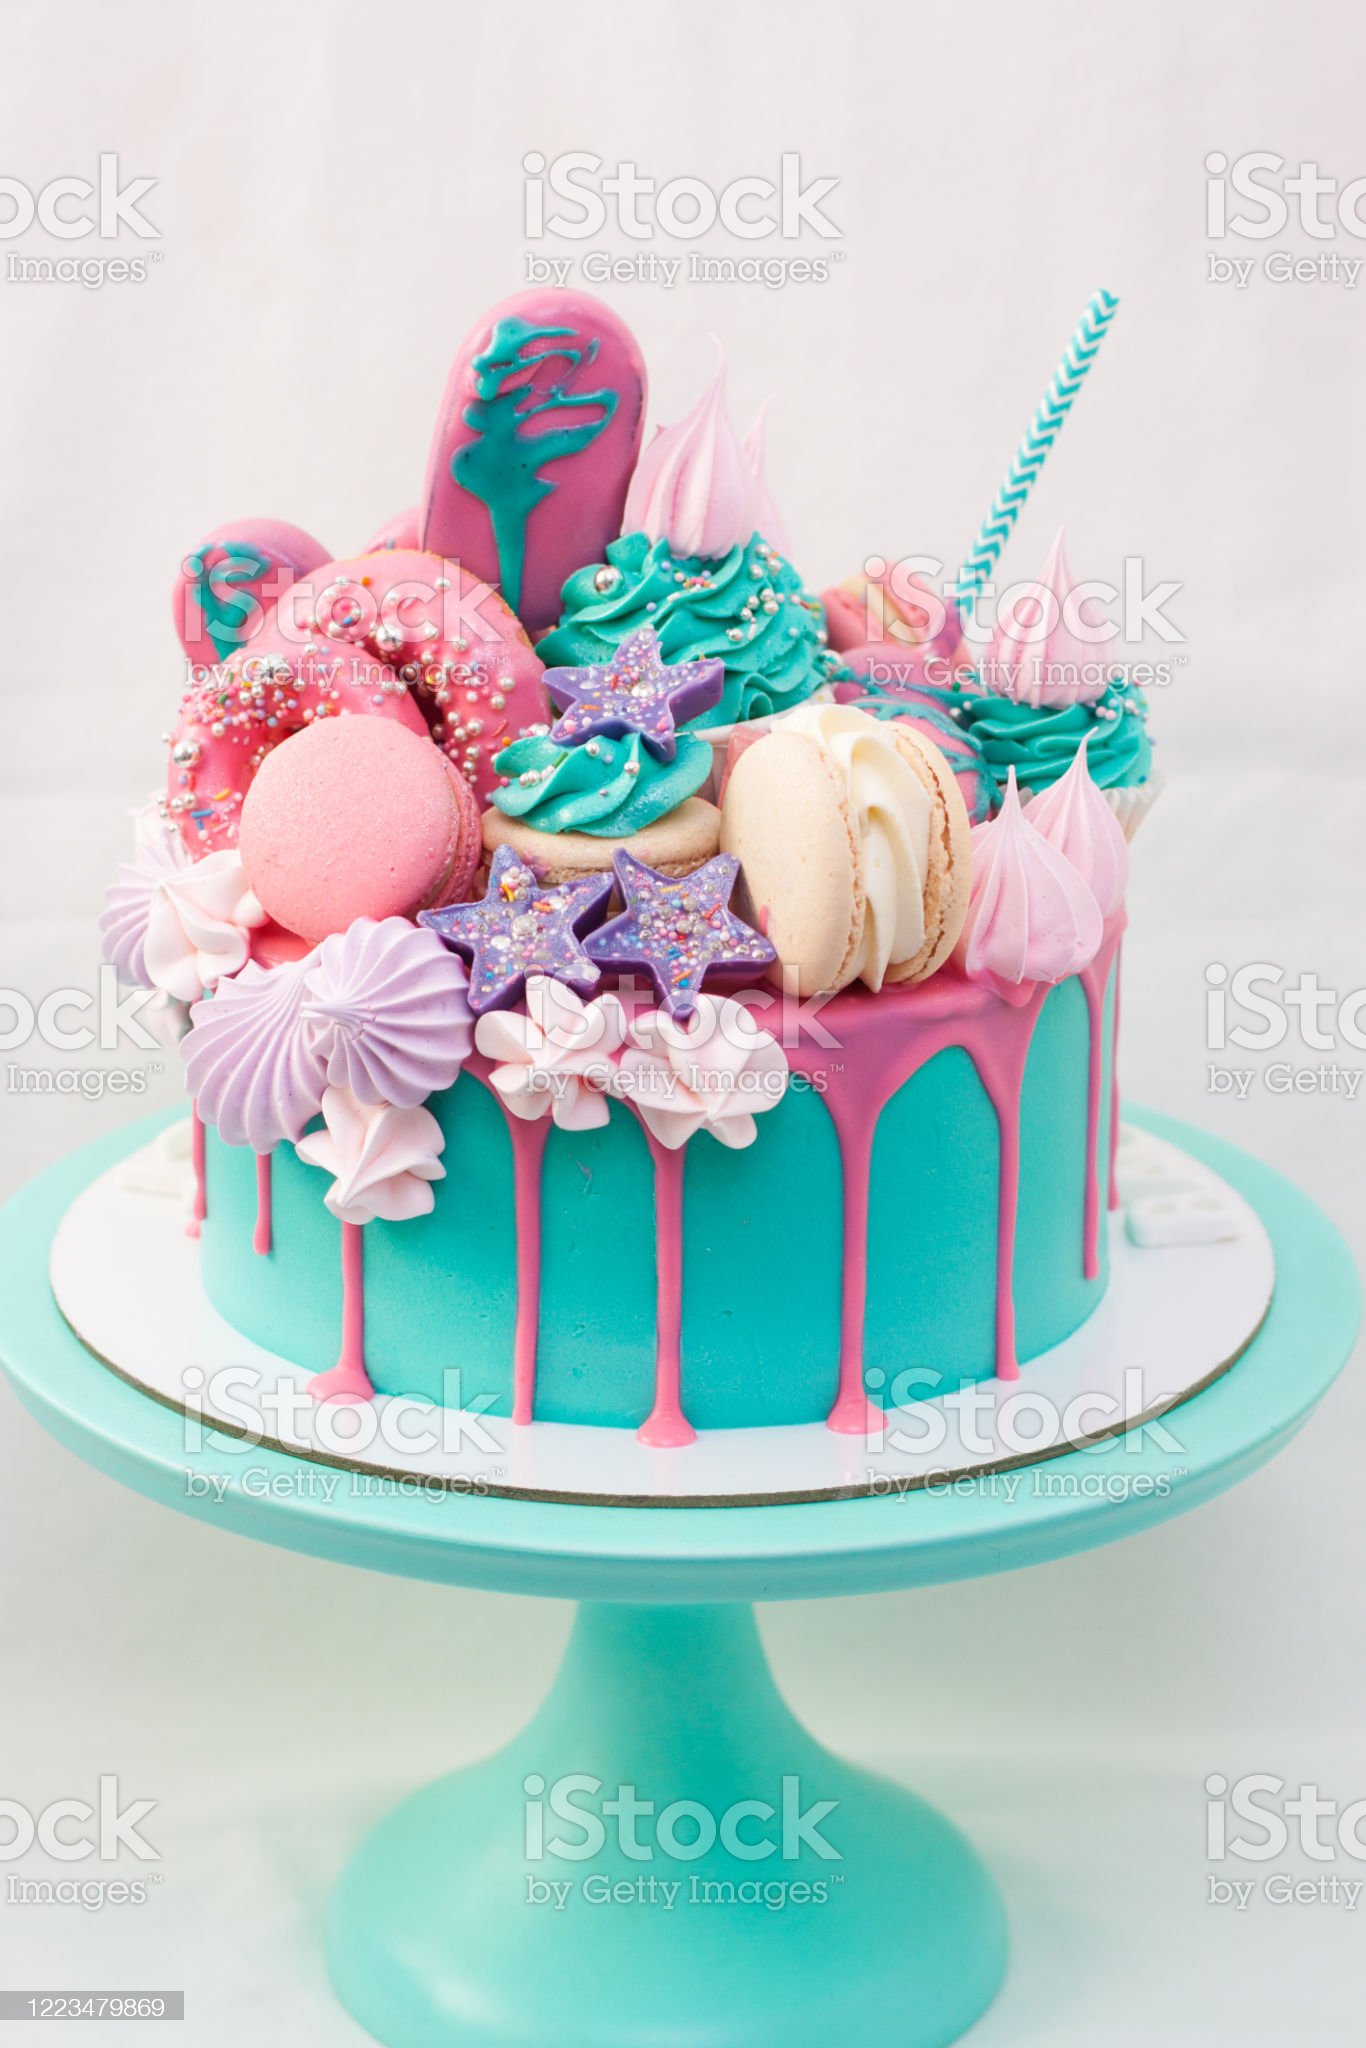  Pink and turquoise cake decorated with macaroons cupcakes